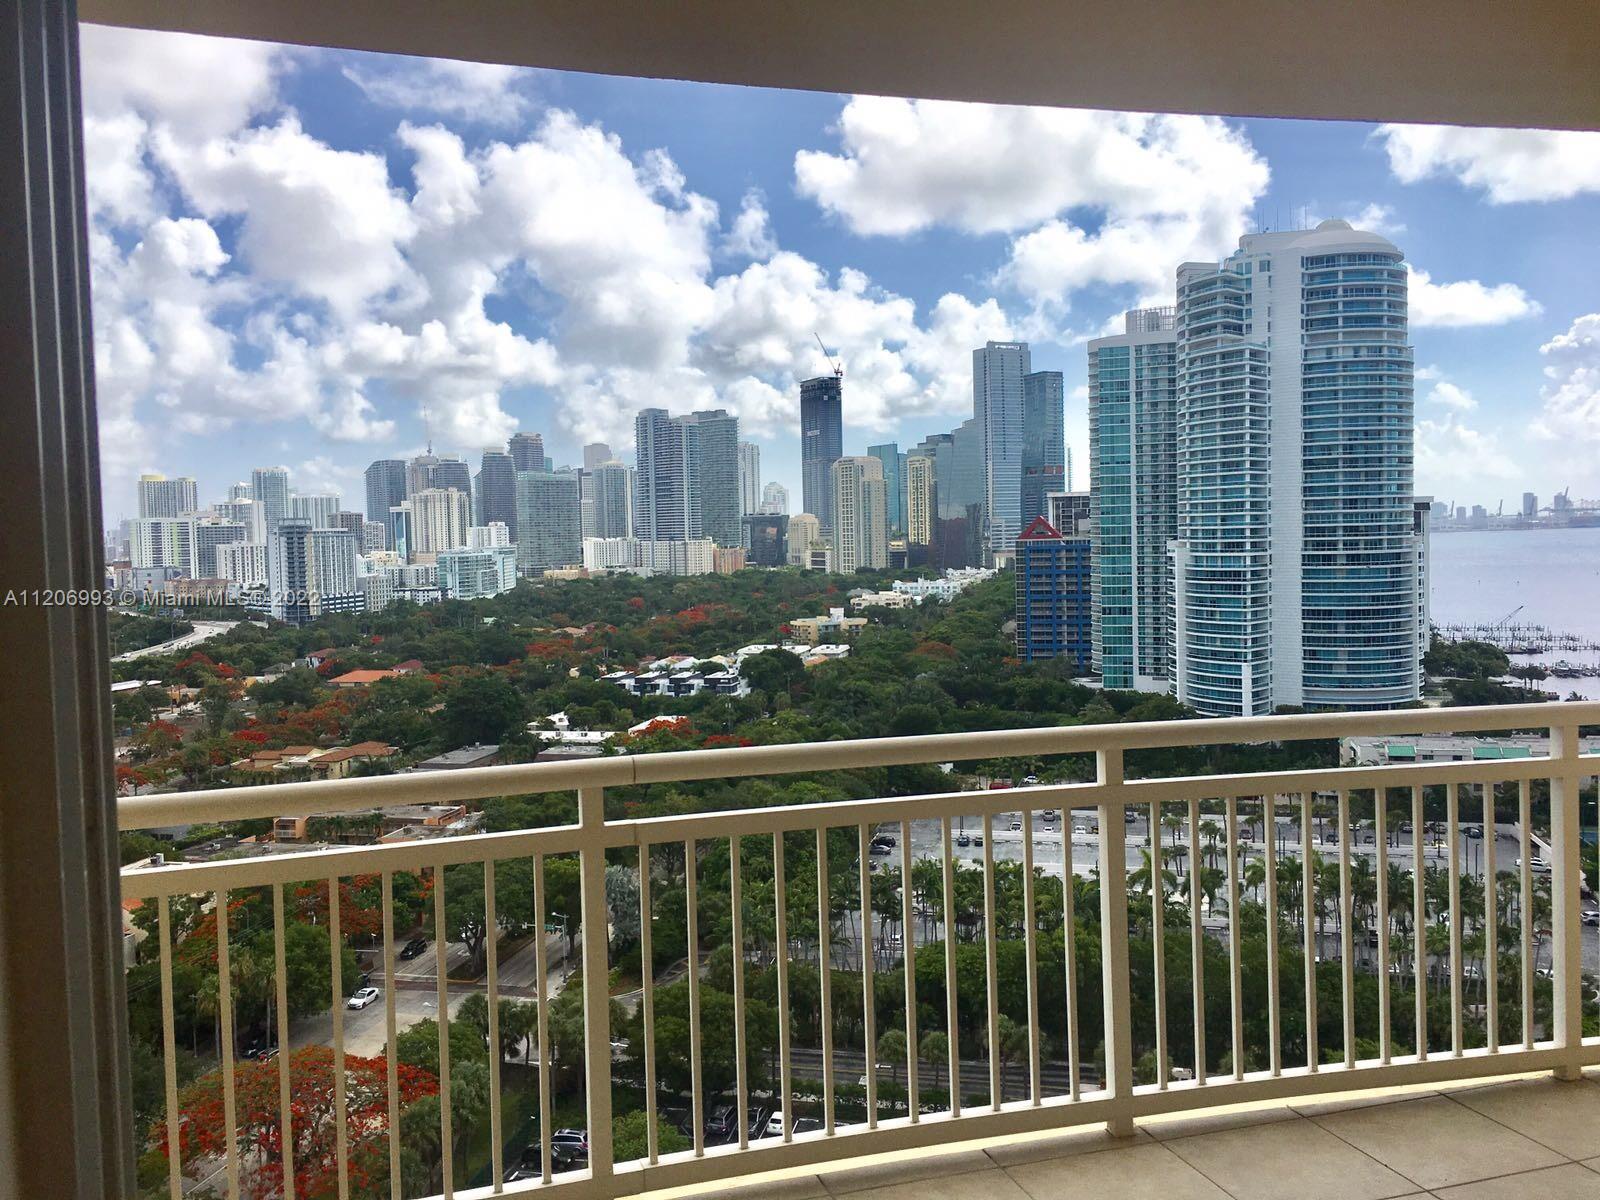 Great opportunity to buy in the best location of Brickell Av. Far from the heavy traffic, close to I95, Key Biscayne, and US1. Beautiful views of Miami Skyline and some intracostal water views too. Granite countertops, stainless steel appliances, Hunter Douglas curtains, Container Store closets, marble, and laminated floors. 2 Parking spaces, and one Storage. Tenant occupied until July 14, 2022.